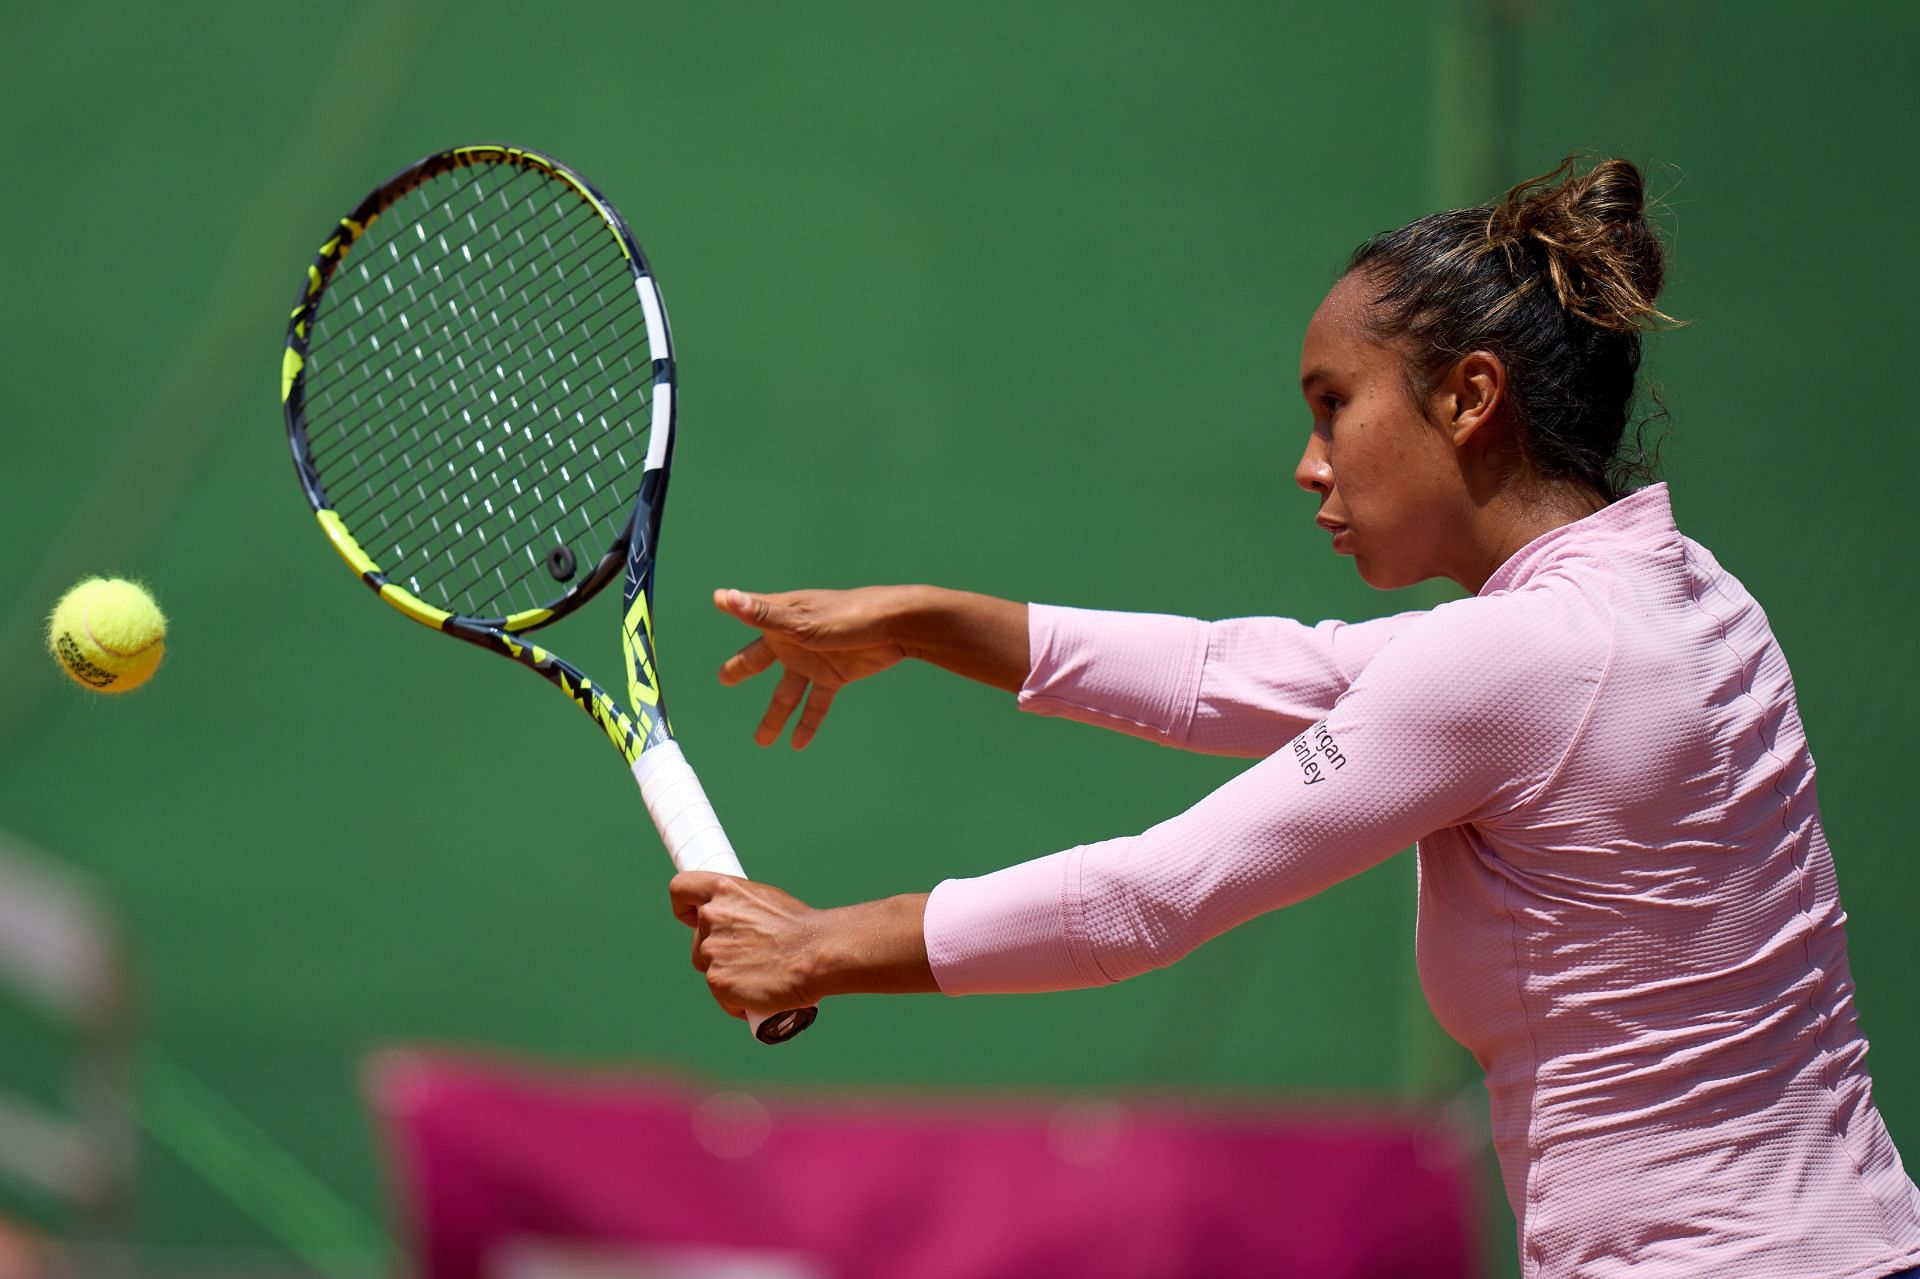 Leylah Fernandez tops Poland's Magda Linette in 1st round of French Open